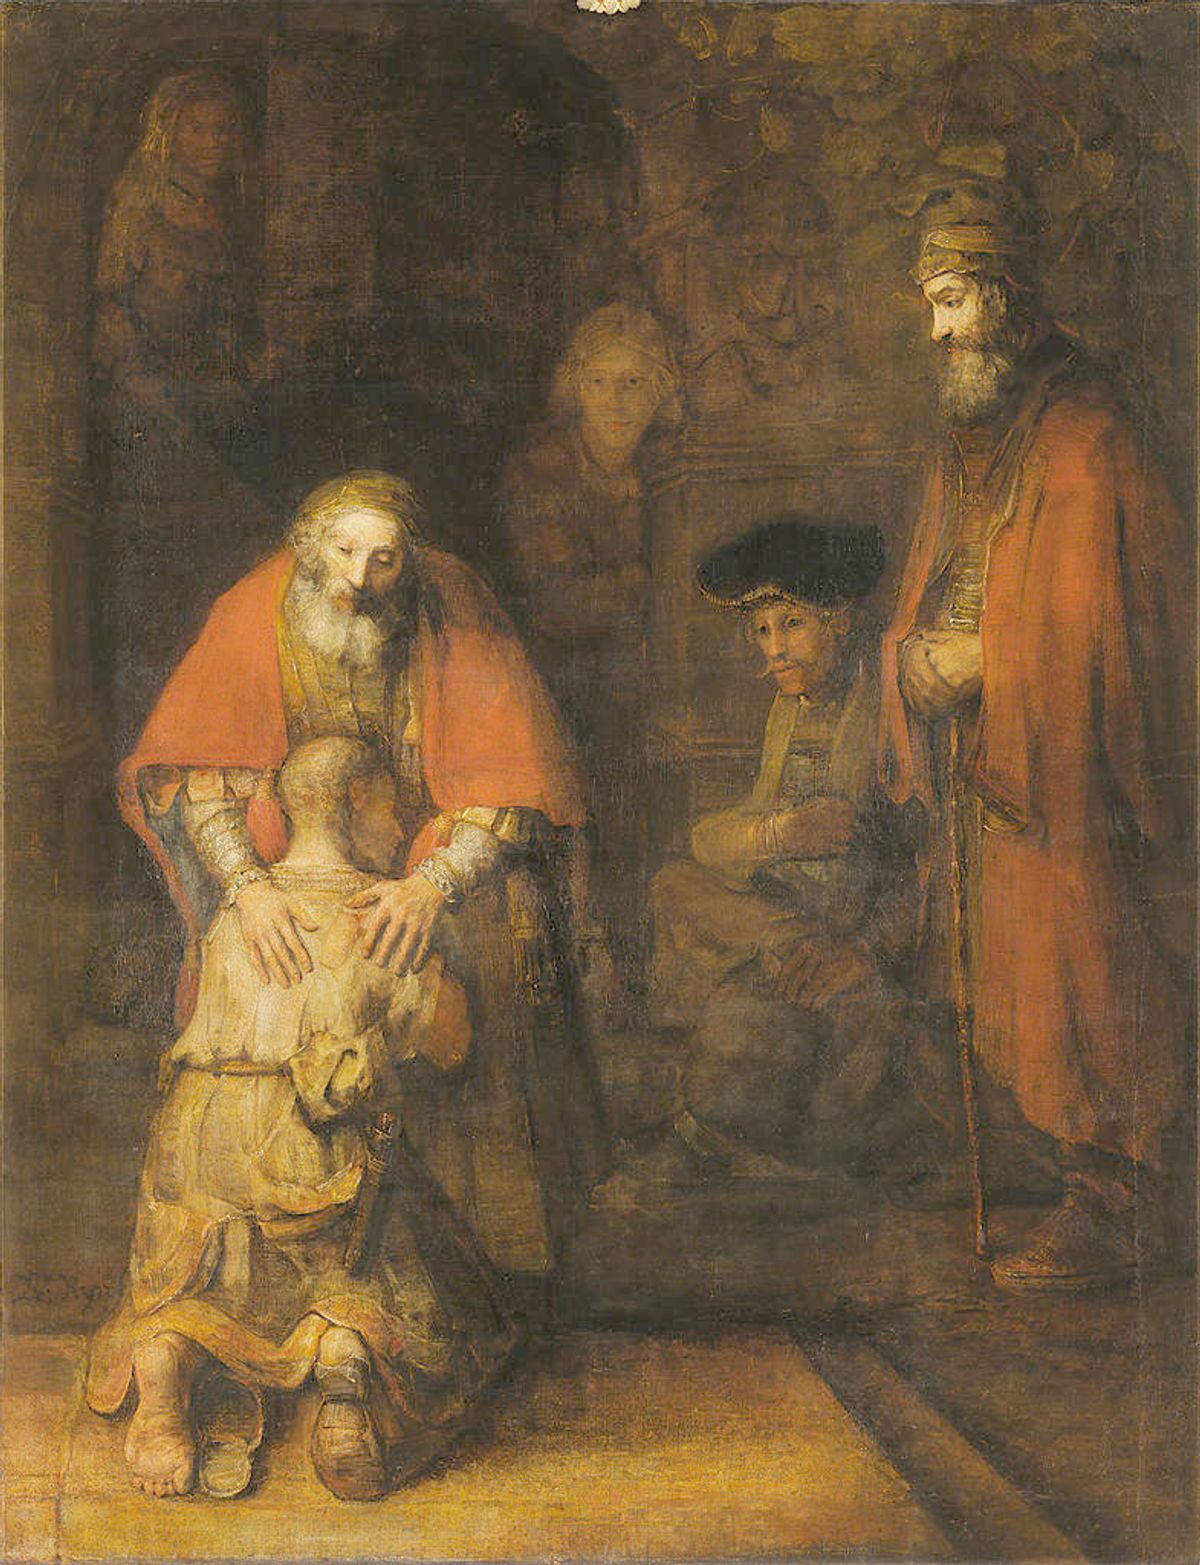 Rembrandt's Prodigal Son painting.